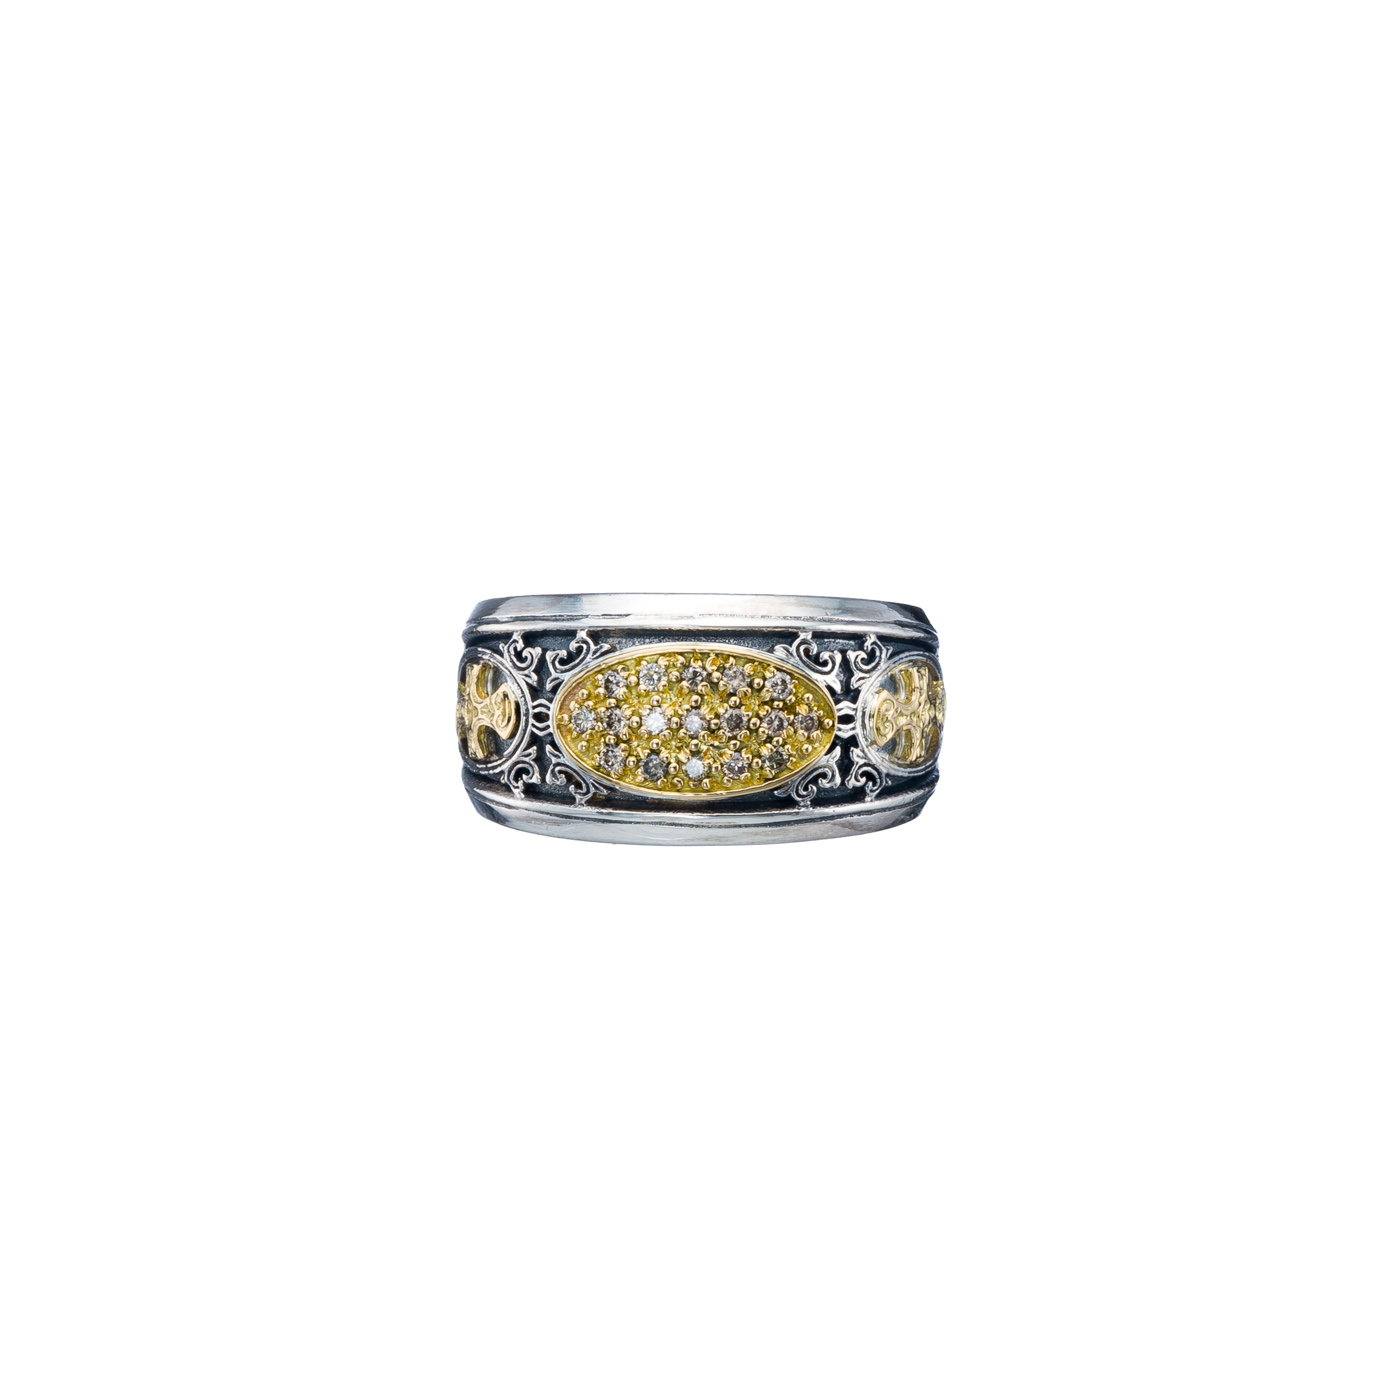 Patmos ring in 18K Gold and Sterling Silver with brown diamonds